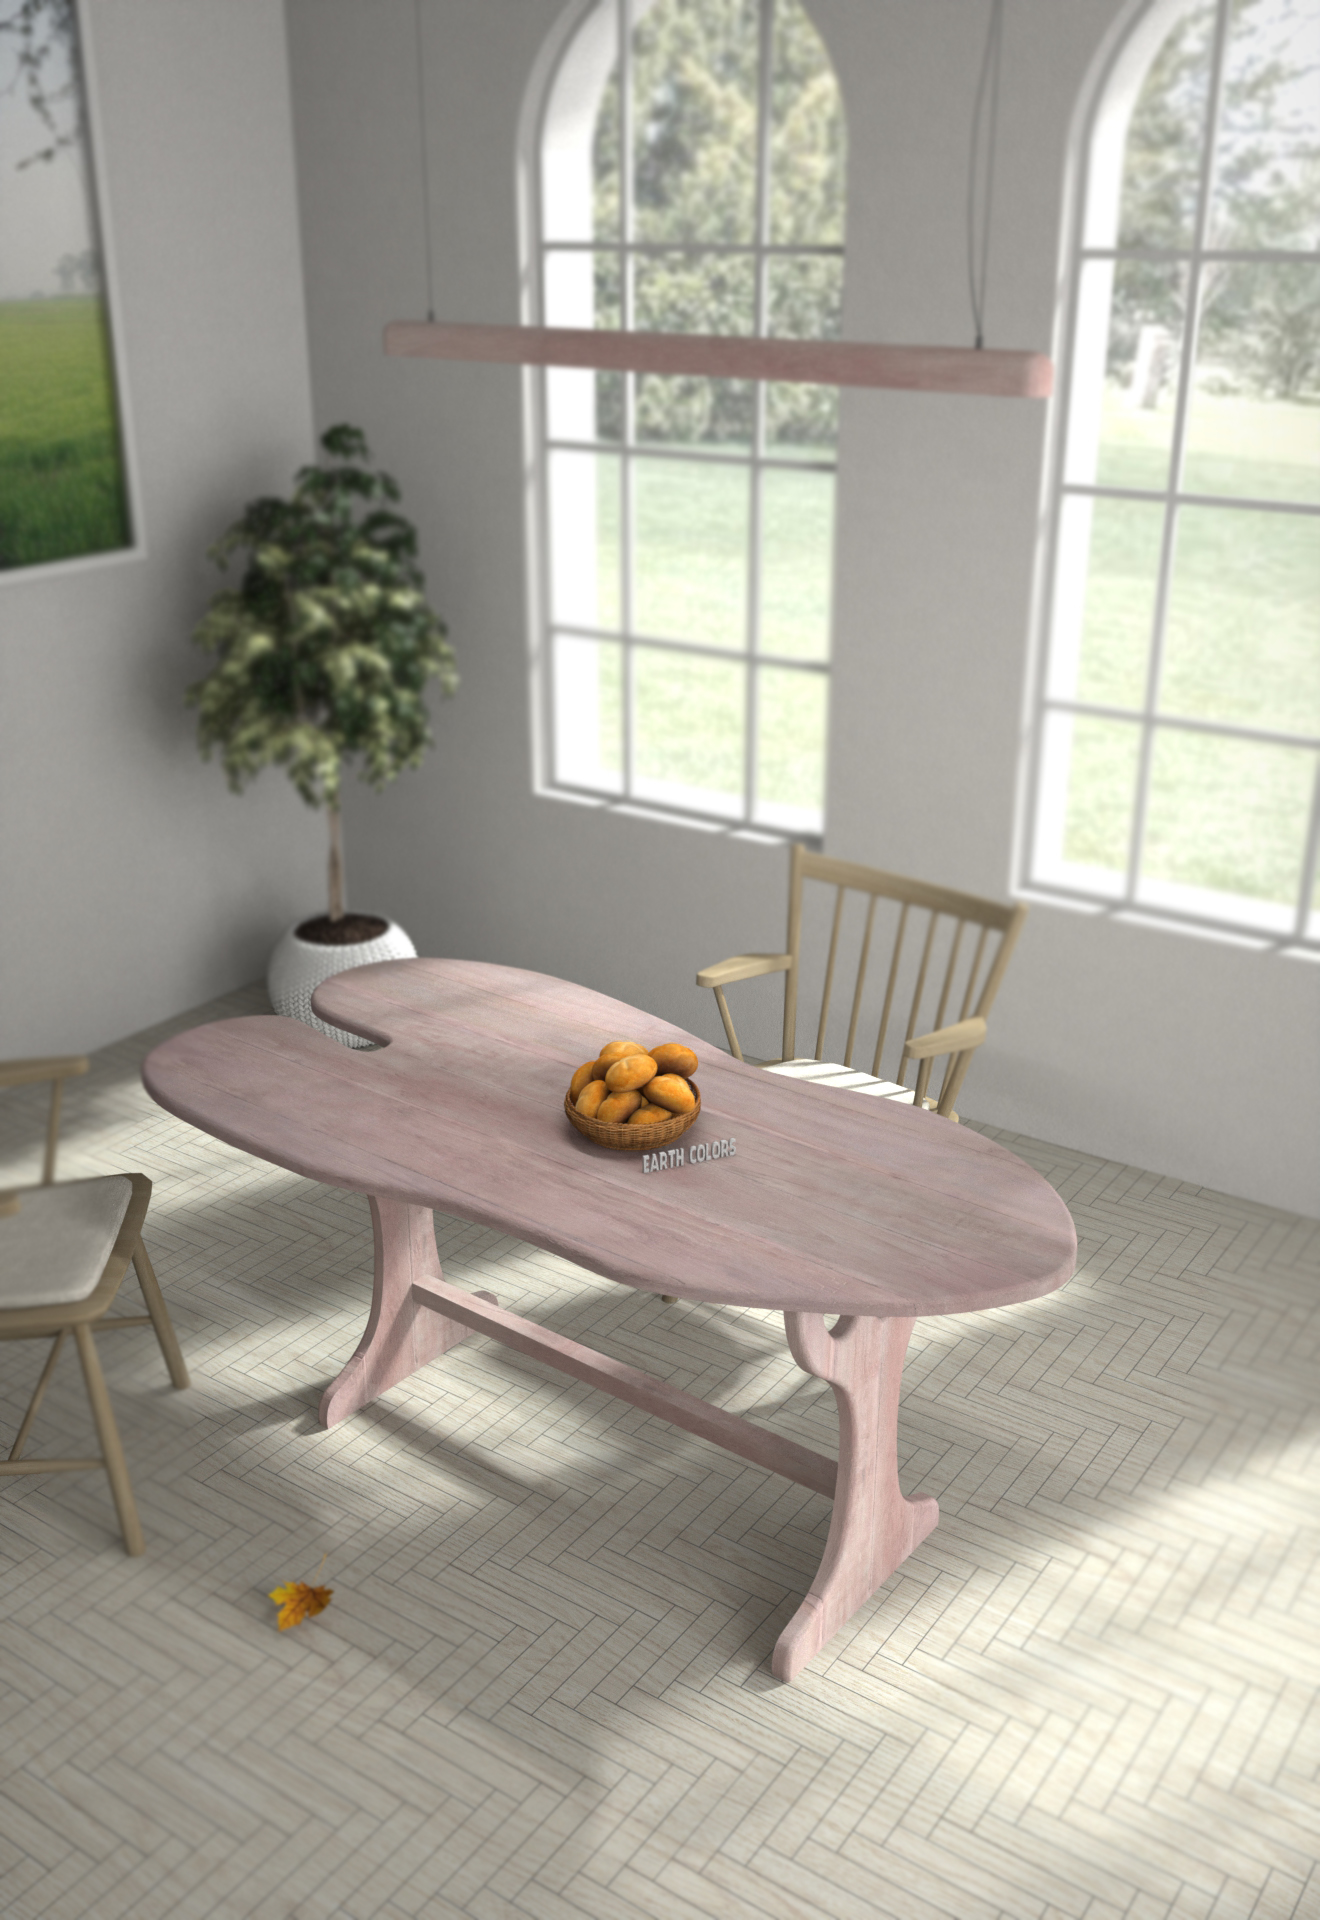 Get Leaf shaped dining table here at EARTHCOLORS